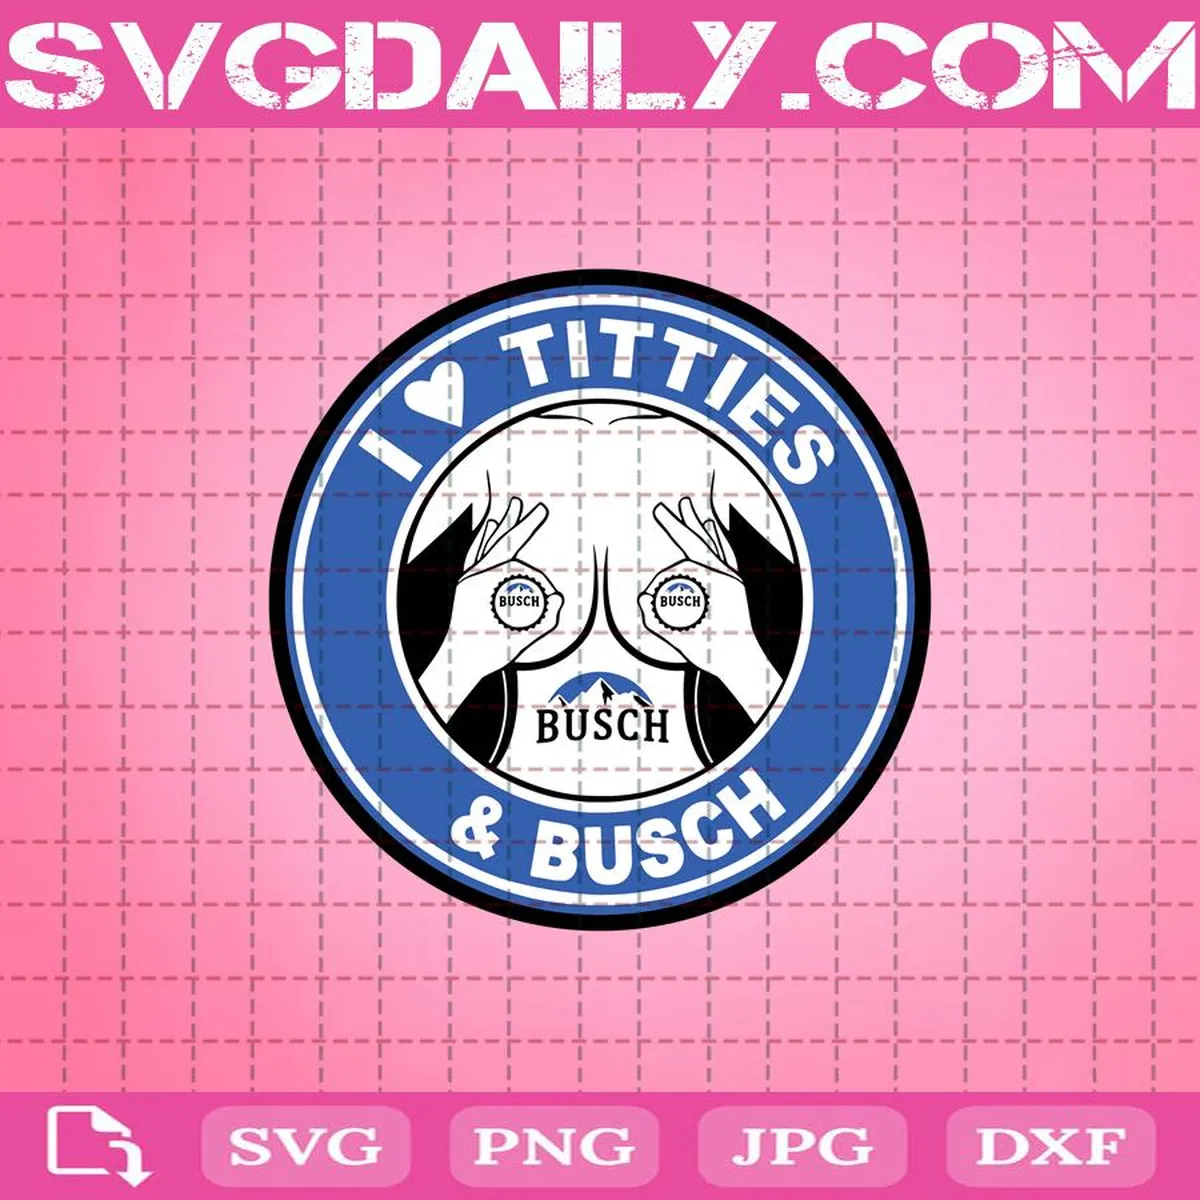 I Love Titties And Busch Svg, I Love Titties Svg, Titties And Busch Svg, Busch Svg, Love Titties Svg, Svg Png Dxf Eps Download Files